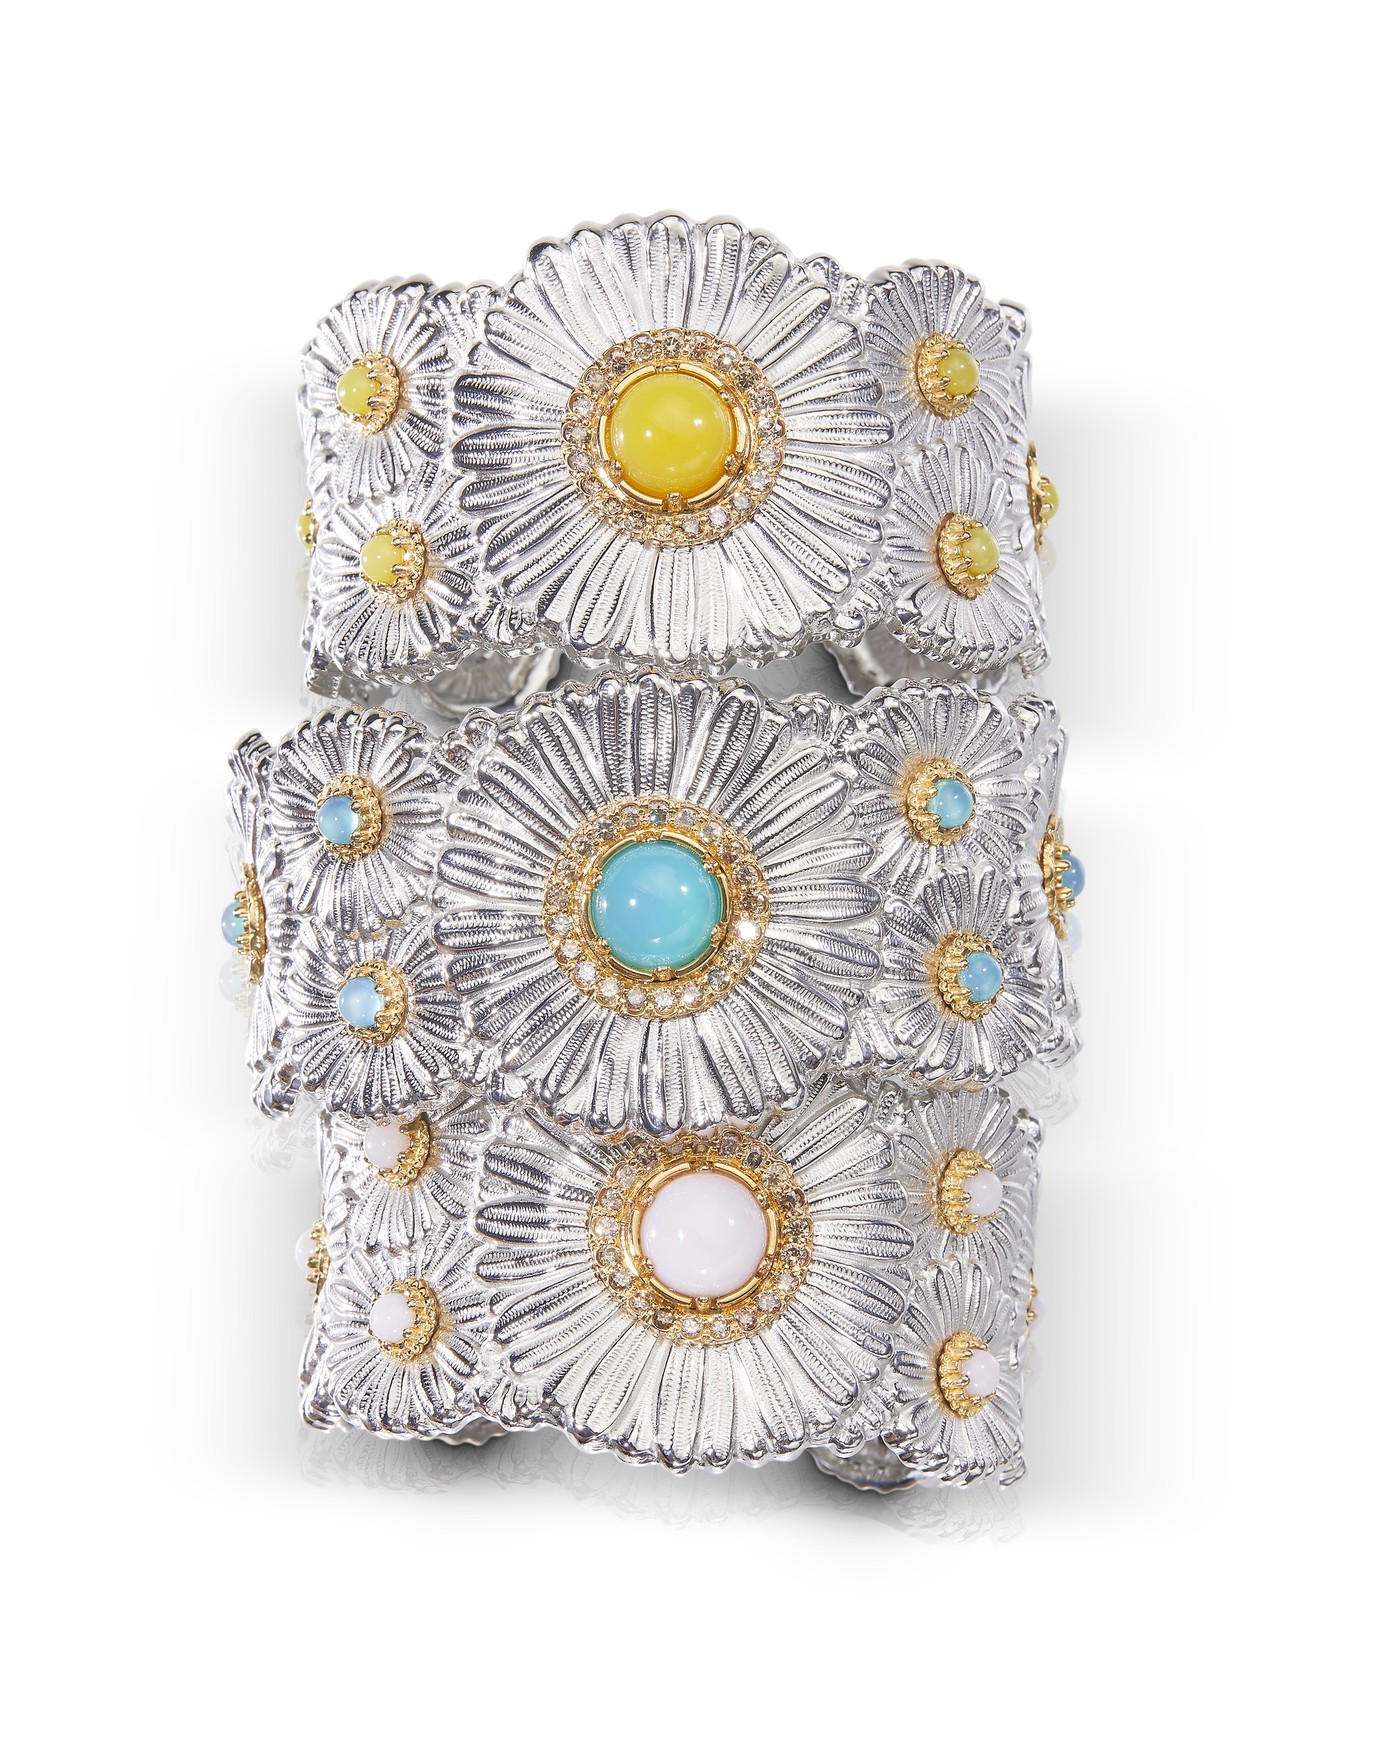 Blossoms Daisy cuff silver bracelets in yellow agate, light blue agate and pink opal set with diamonds